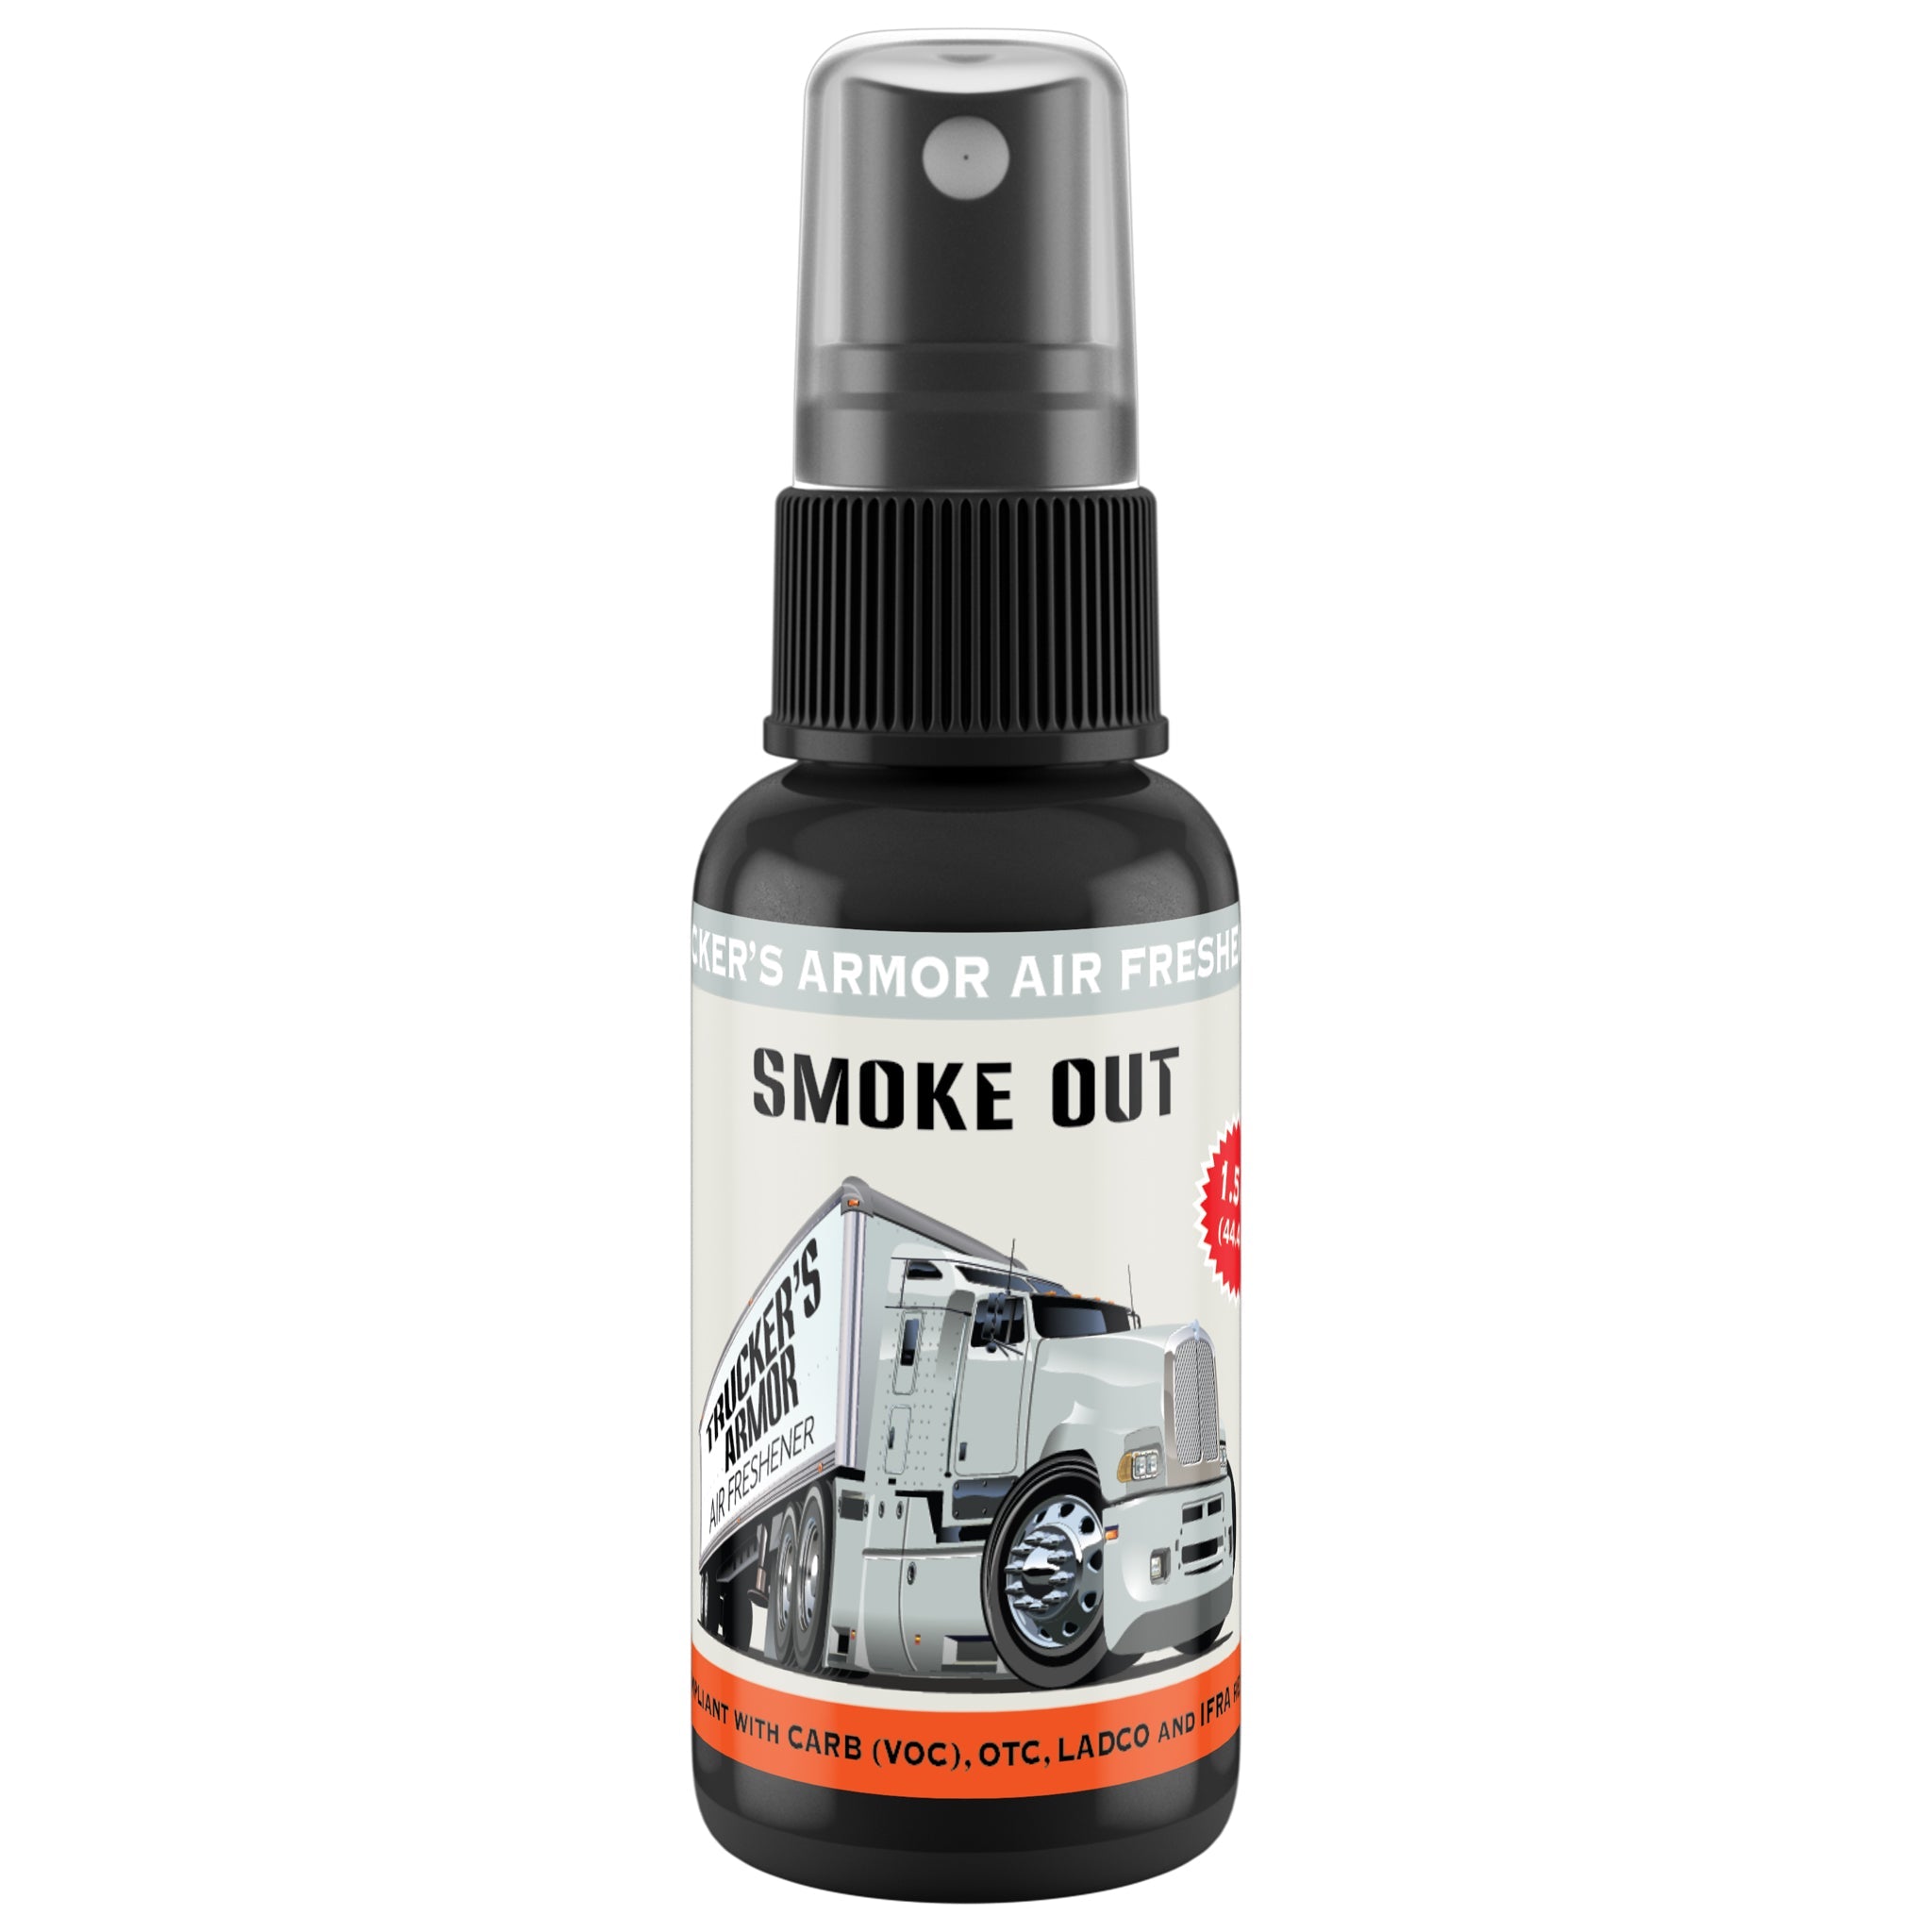 Trucker's Armor Air Freshener - Smoke Out Scent